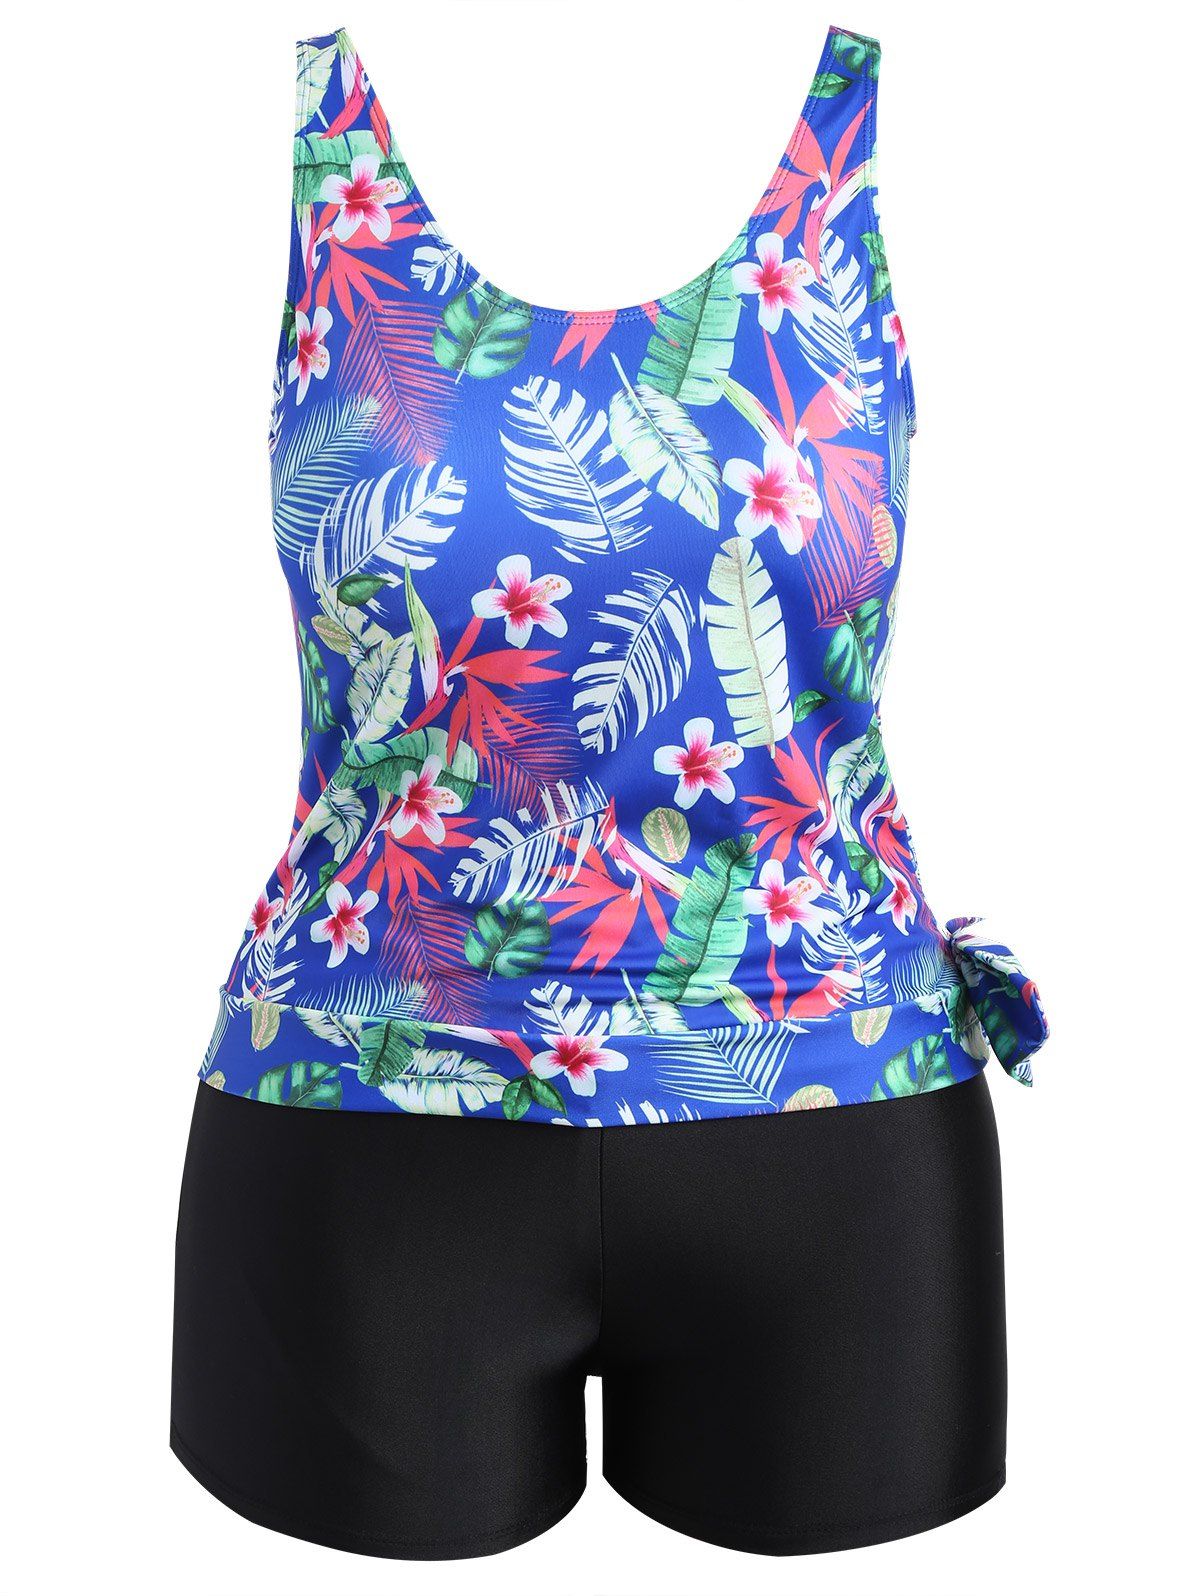 [17% OFF] 2021 Tropical Leaf Floral Print Plus Size Tankini Set In BLUE ...